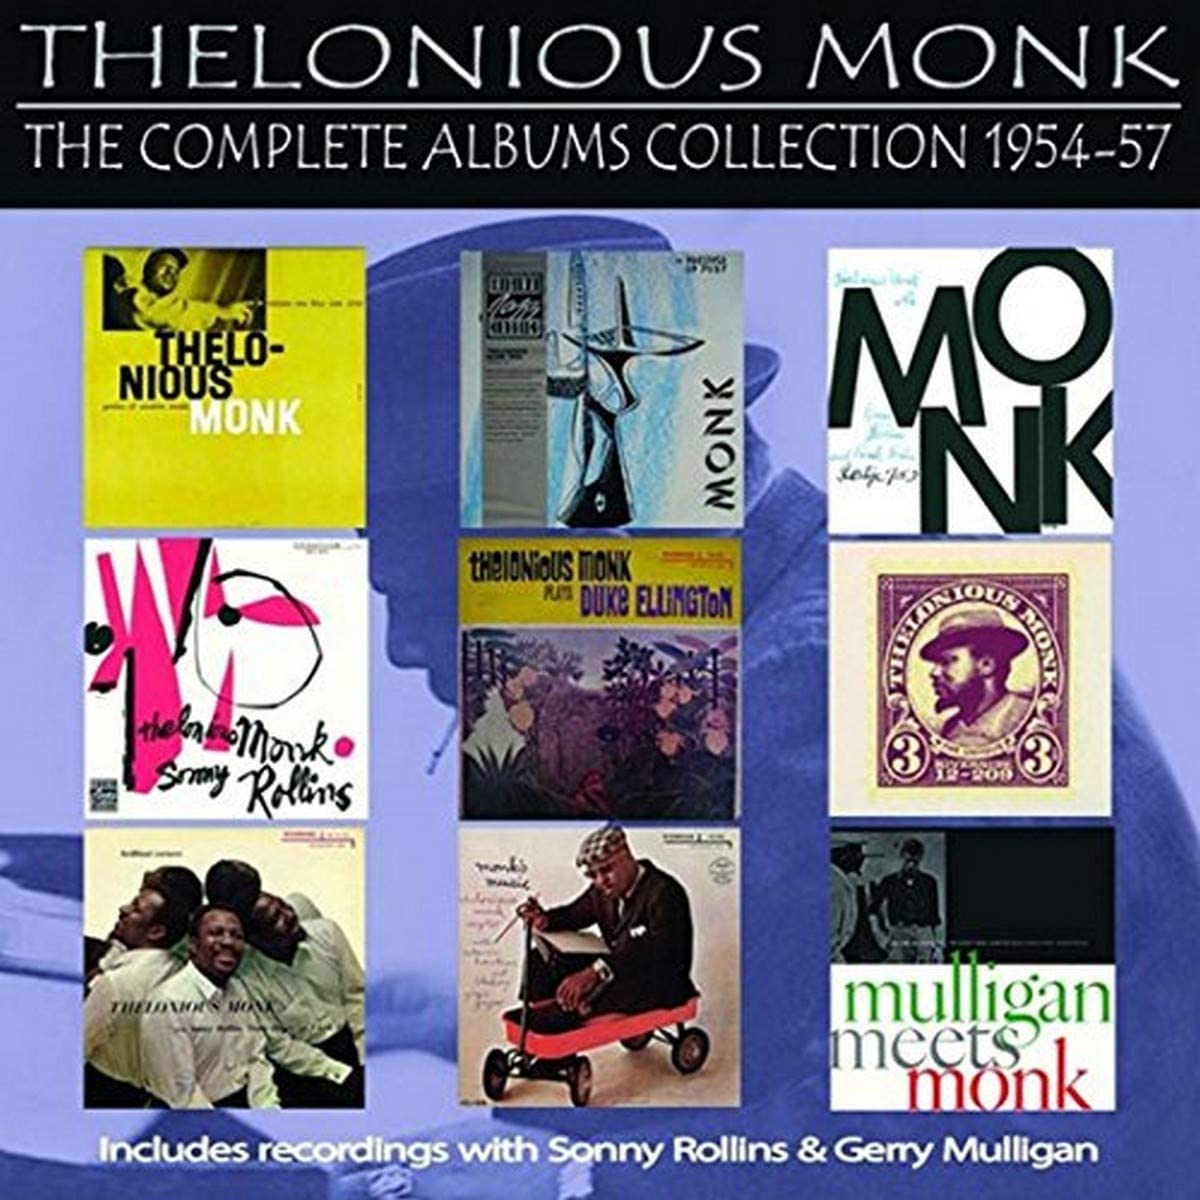 Thelonious Monk - The Complete Albums Collection 1954 - 1957 - 5CD